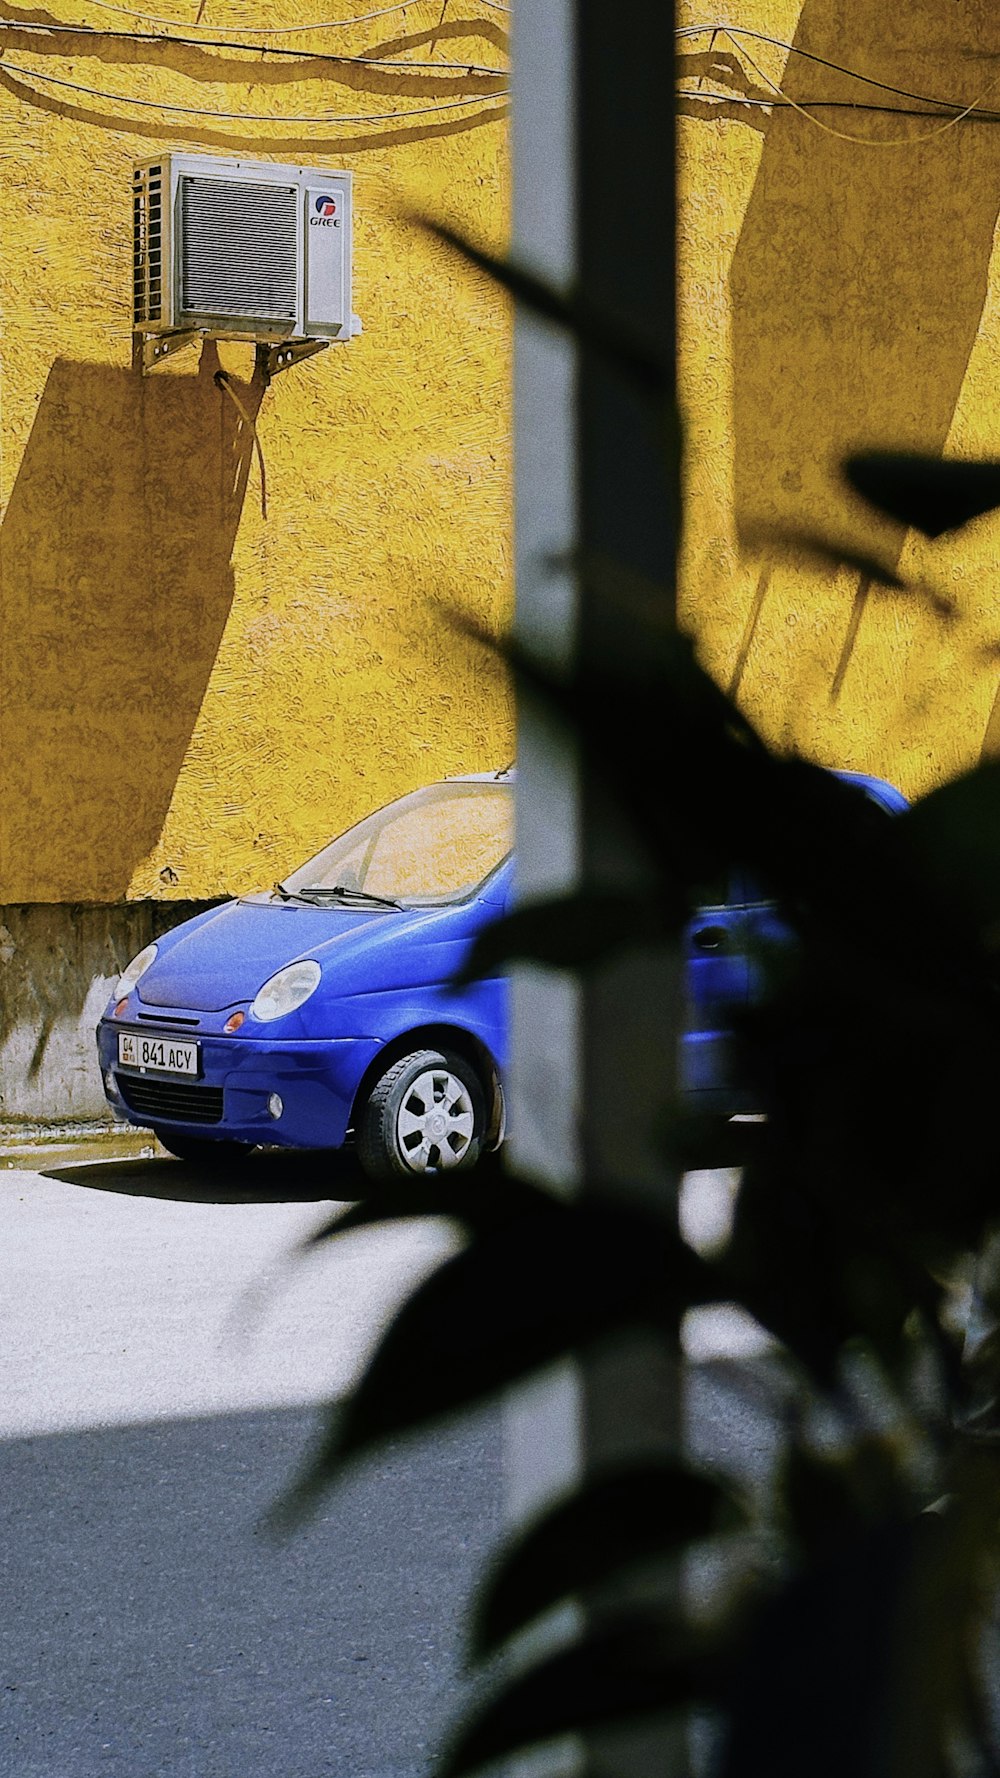 a blue car parked in front of a yellow wall